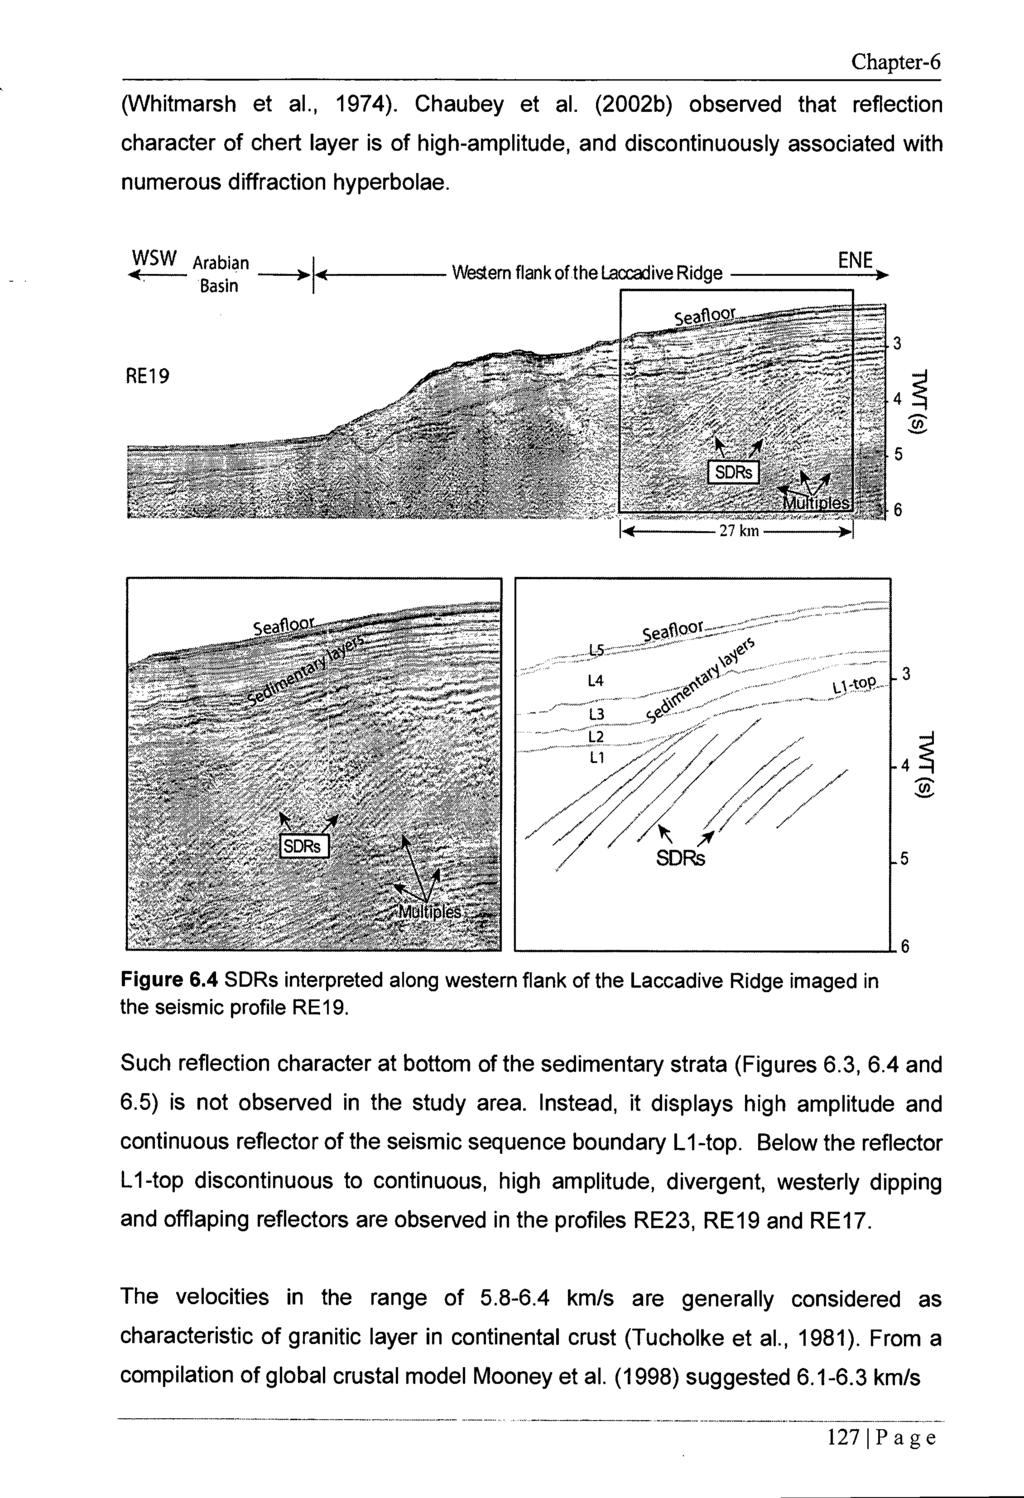 (Whitmarsh et al., 1974). Chaubey et al. (2002b) observed that reflection character of chert layer is of high-amplitude, and discontinuously associated with numerous diffraction hyperbolae.